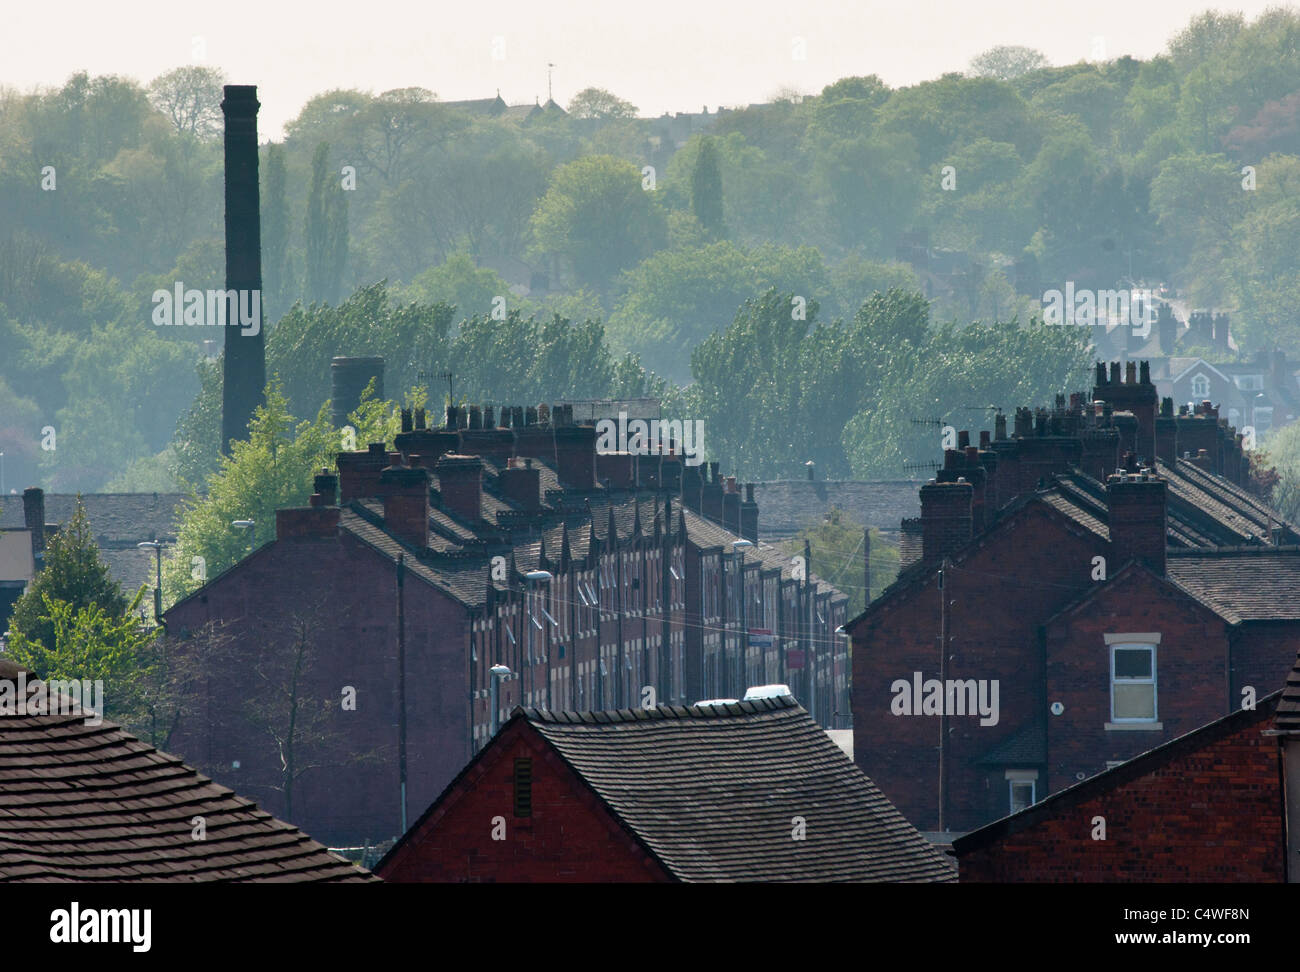 An urban landscape of Potteries factory housing in Middleport, Stoke-on-Trent, Staffordshire, England. Stock Photo